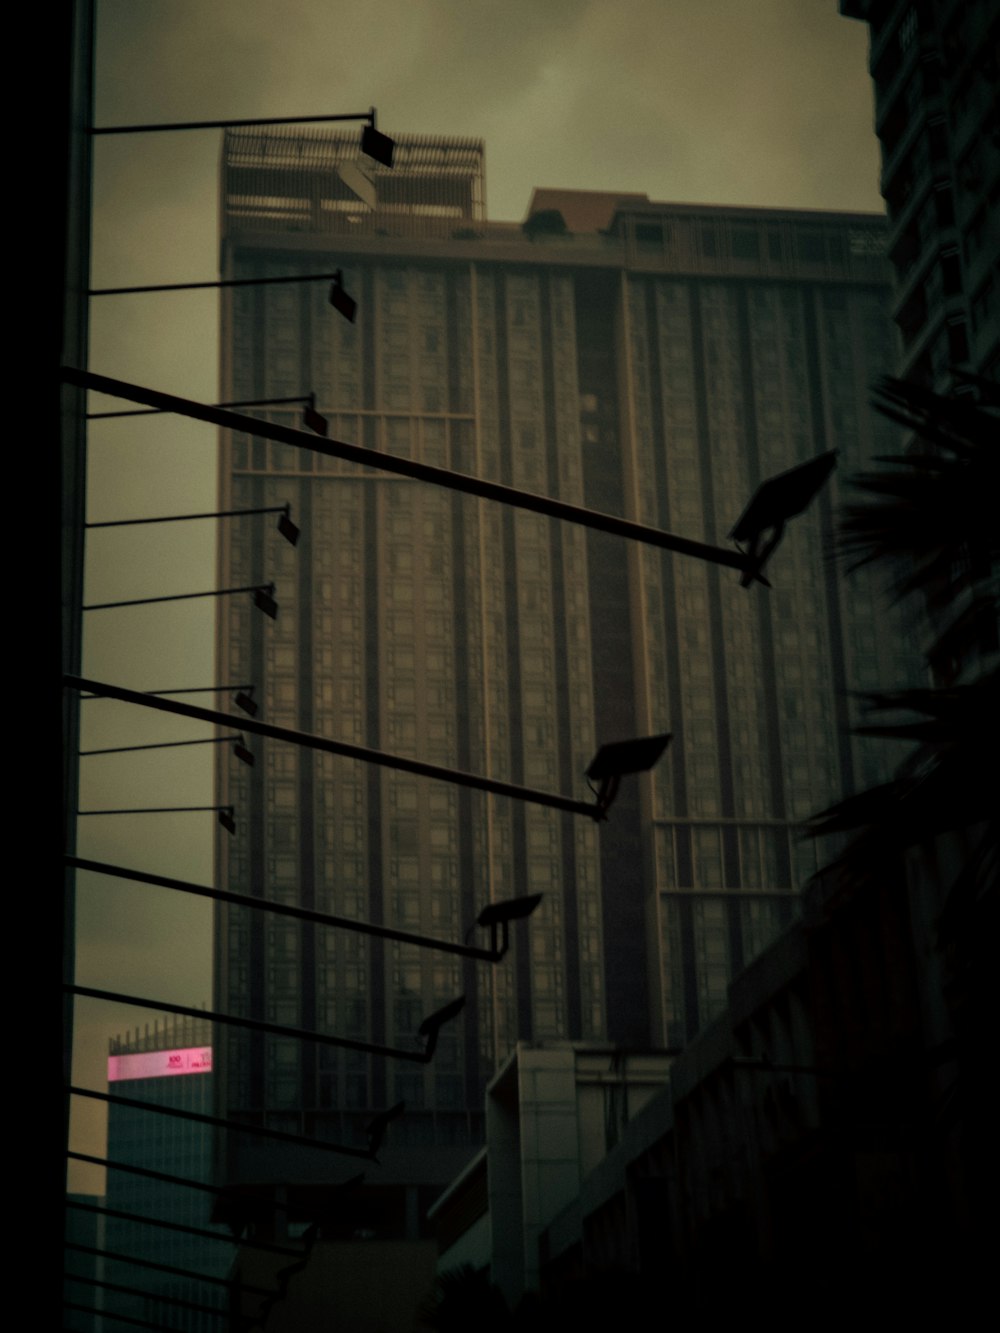 birds are sitting on wires in front of a tall building